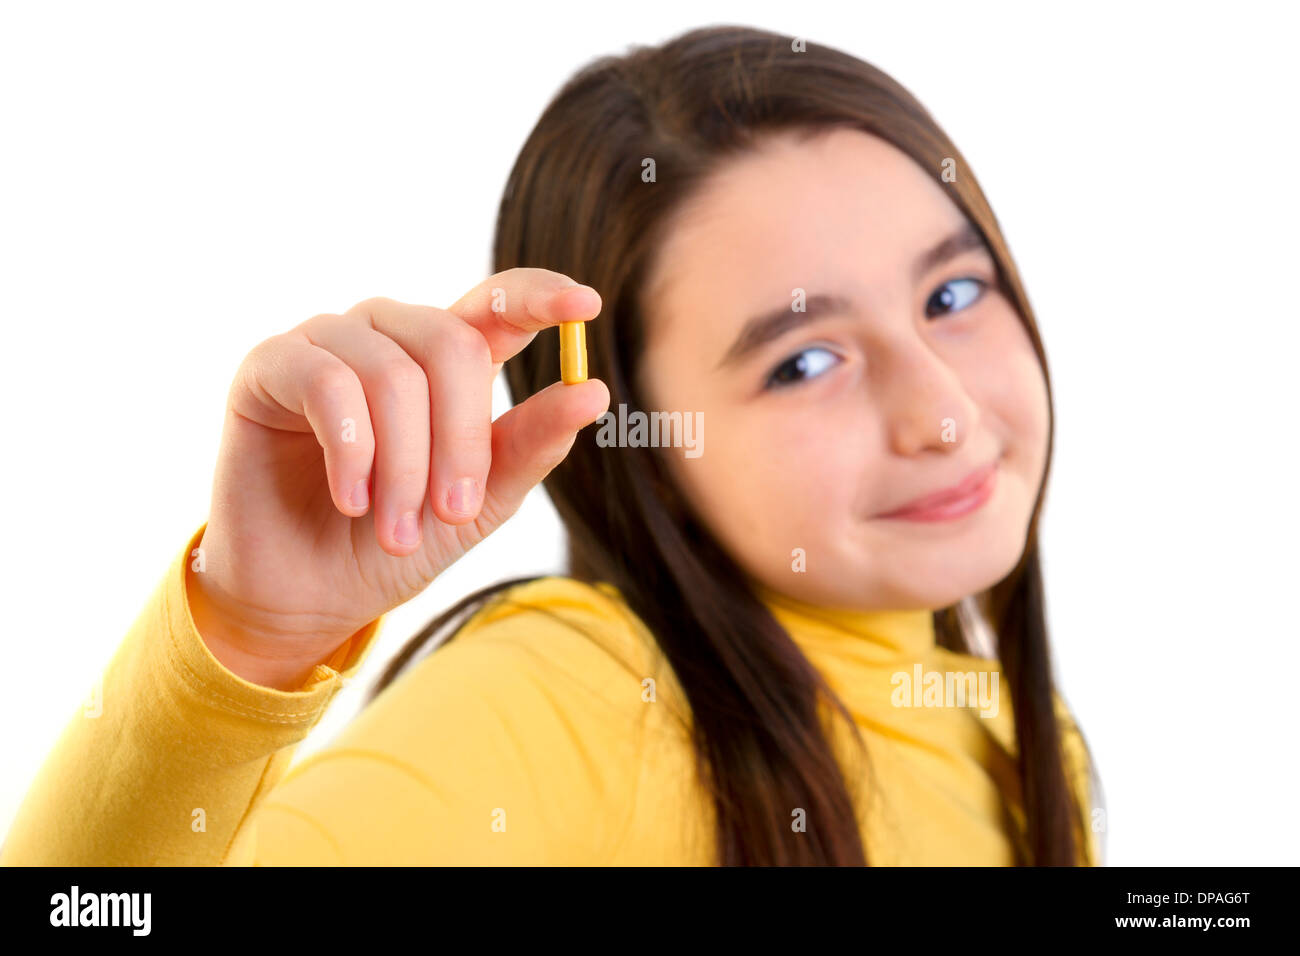 young girl holding capsule and looking to camera Stock Photo